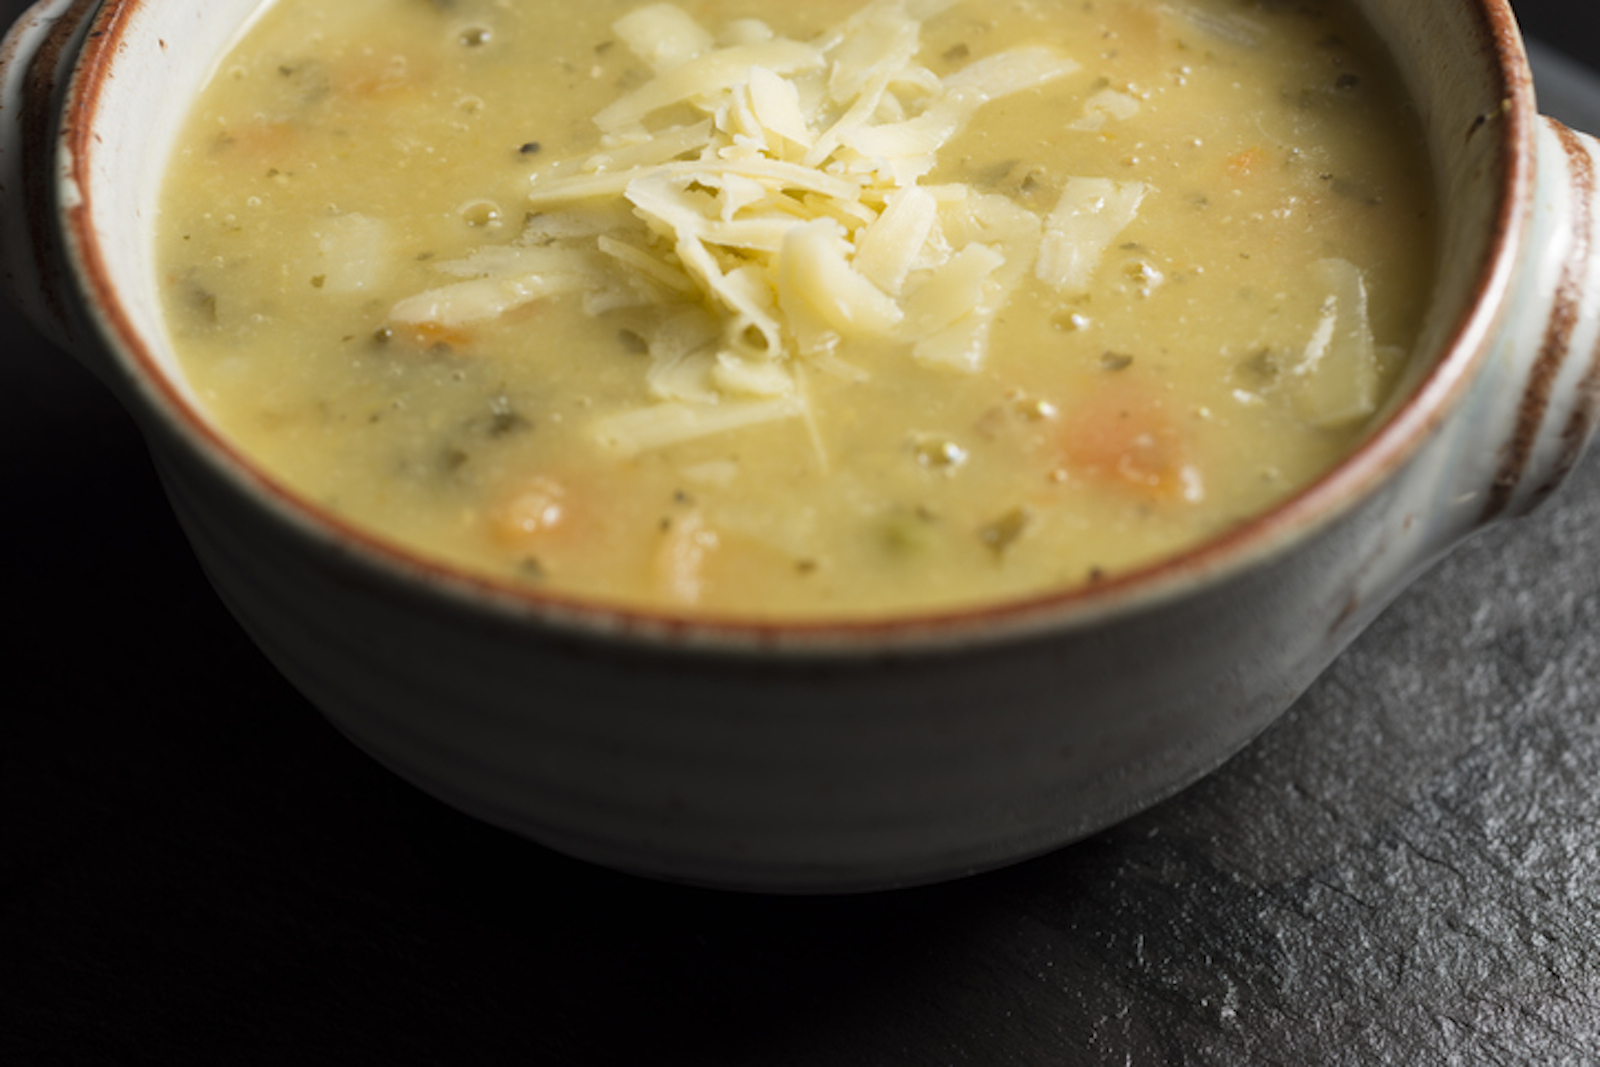 Rice, onions, carrots, garlic and celery: the perfect soup